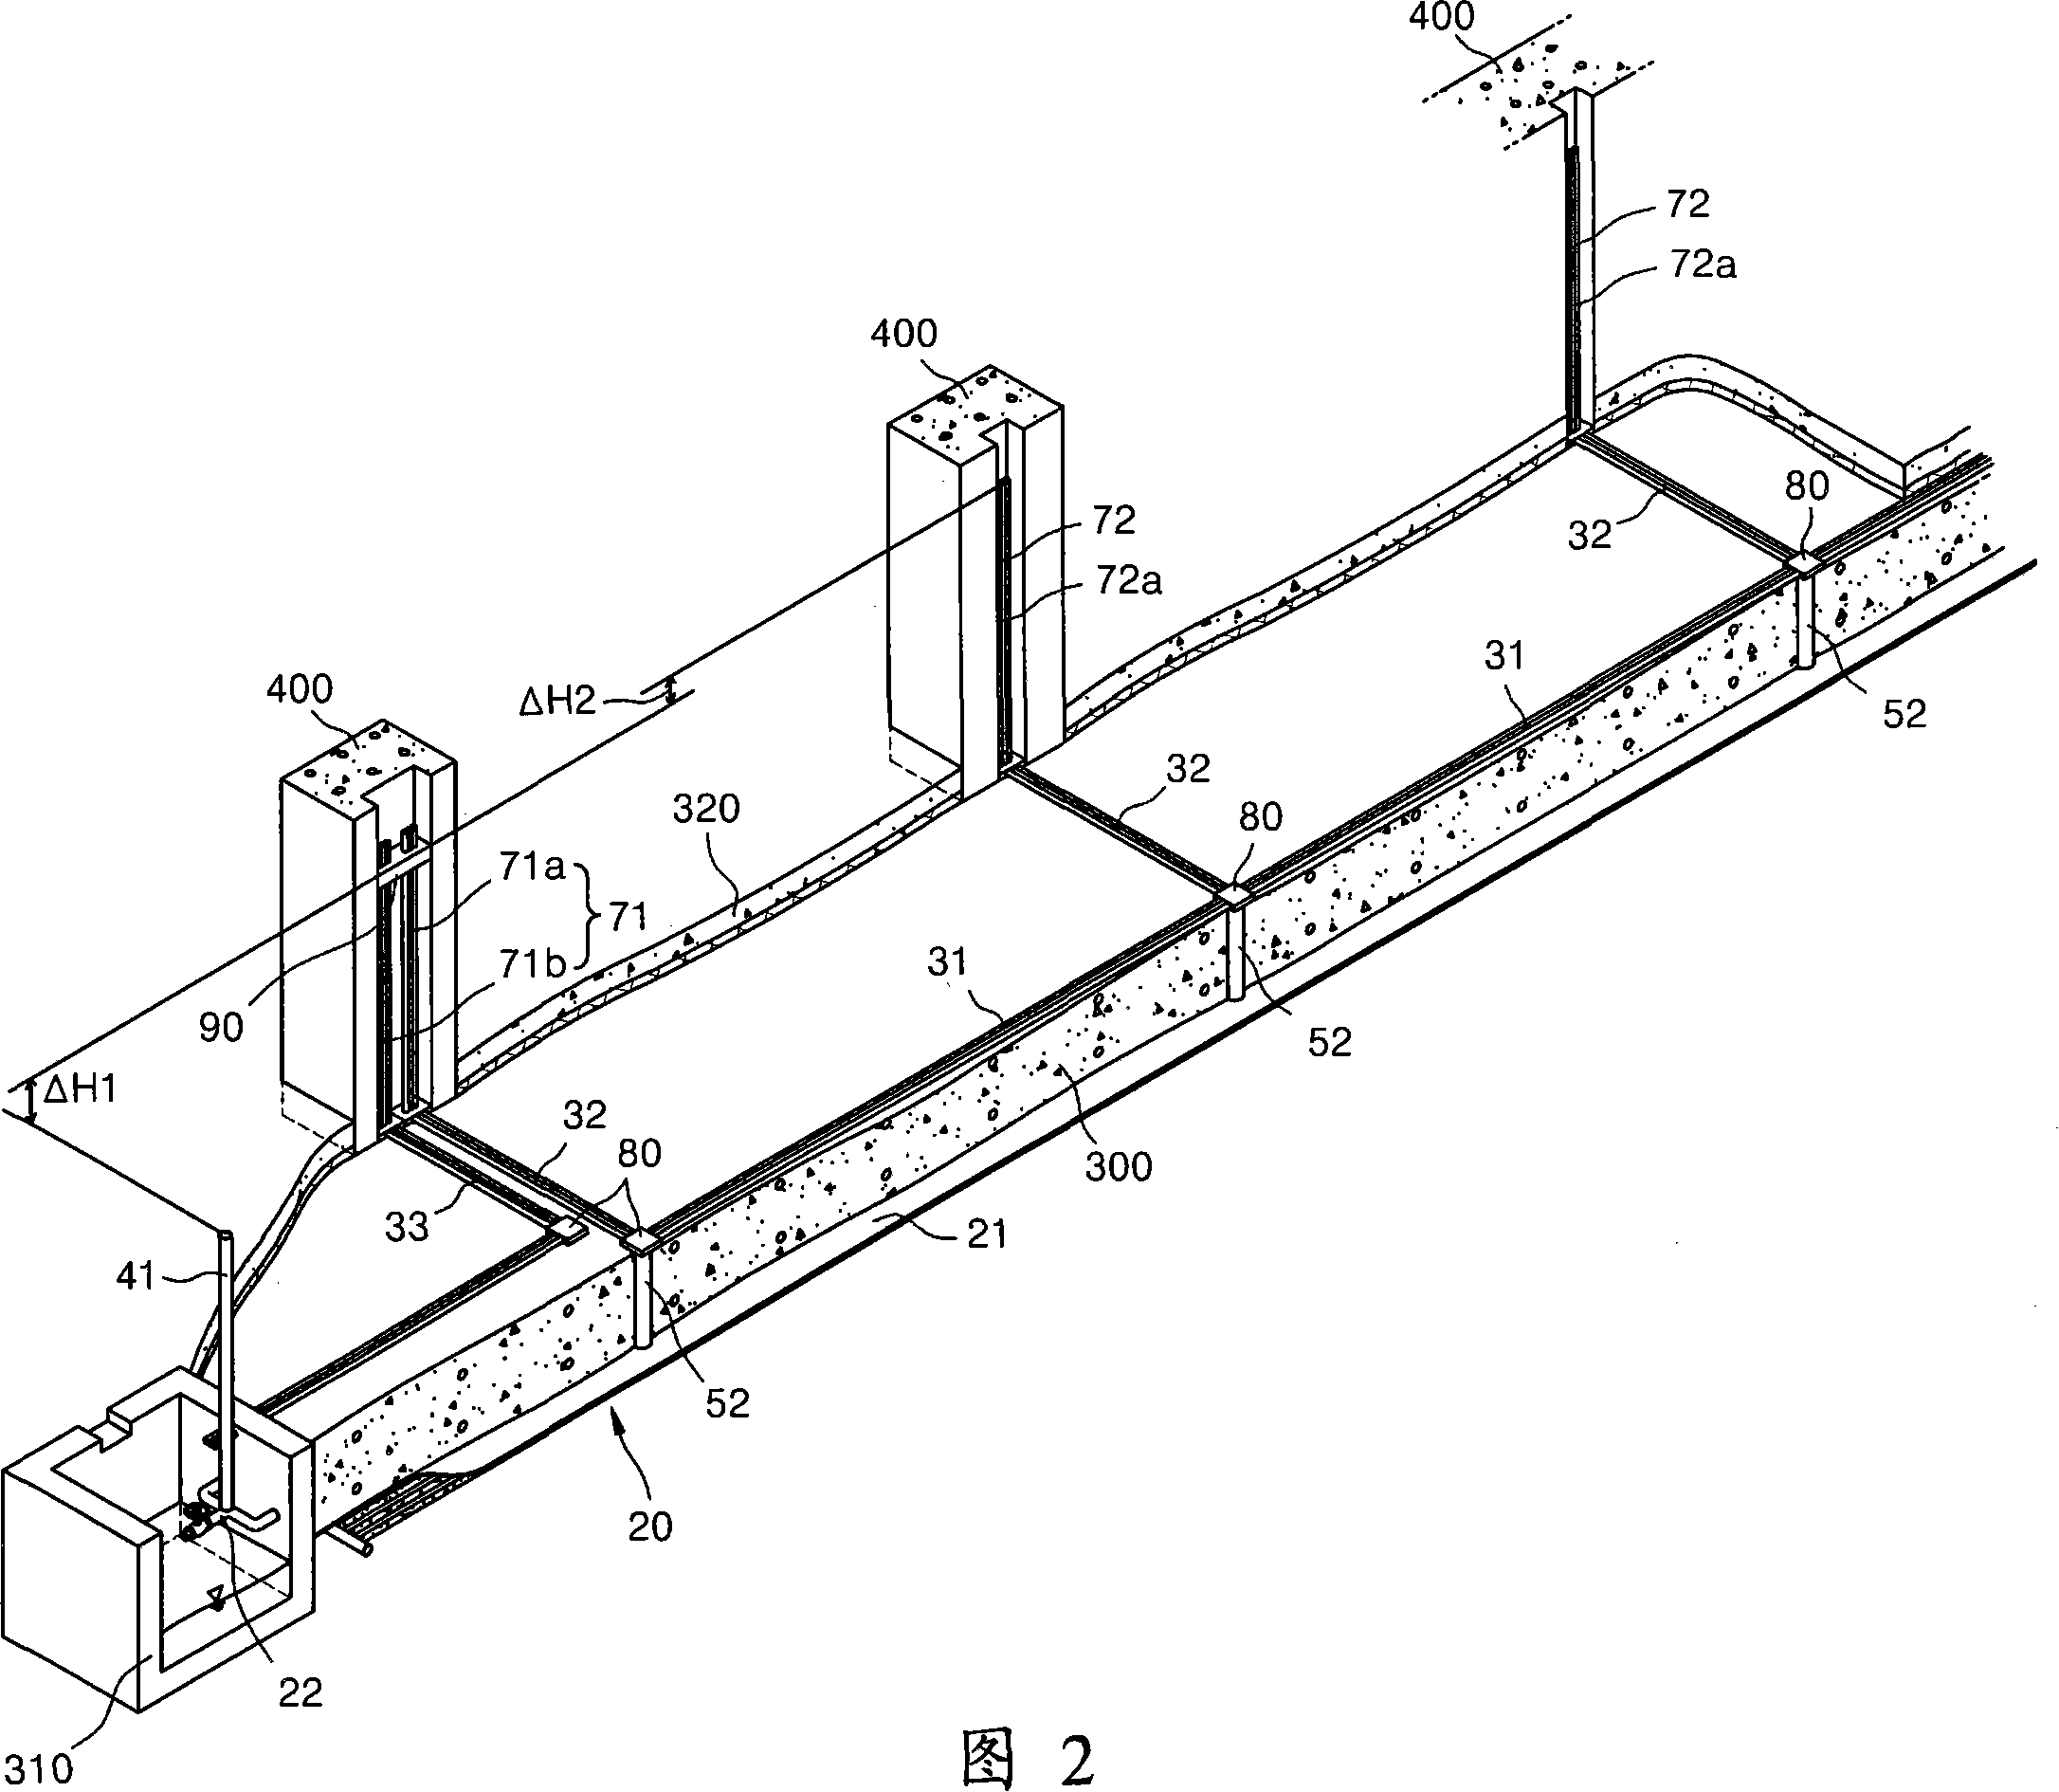 Apparatus for draining subsurface water